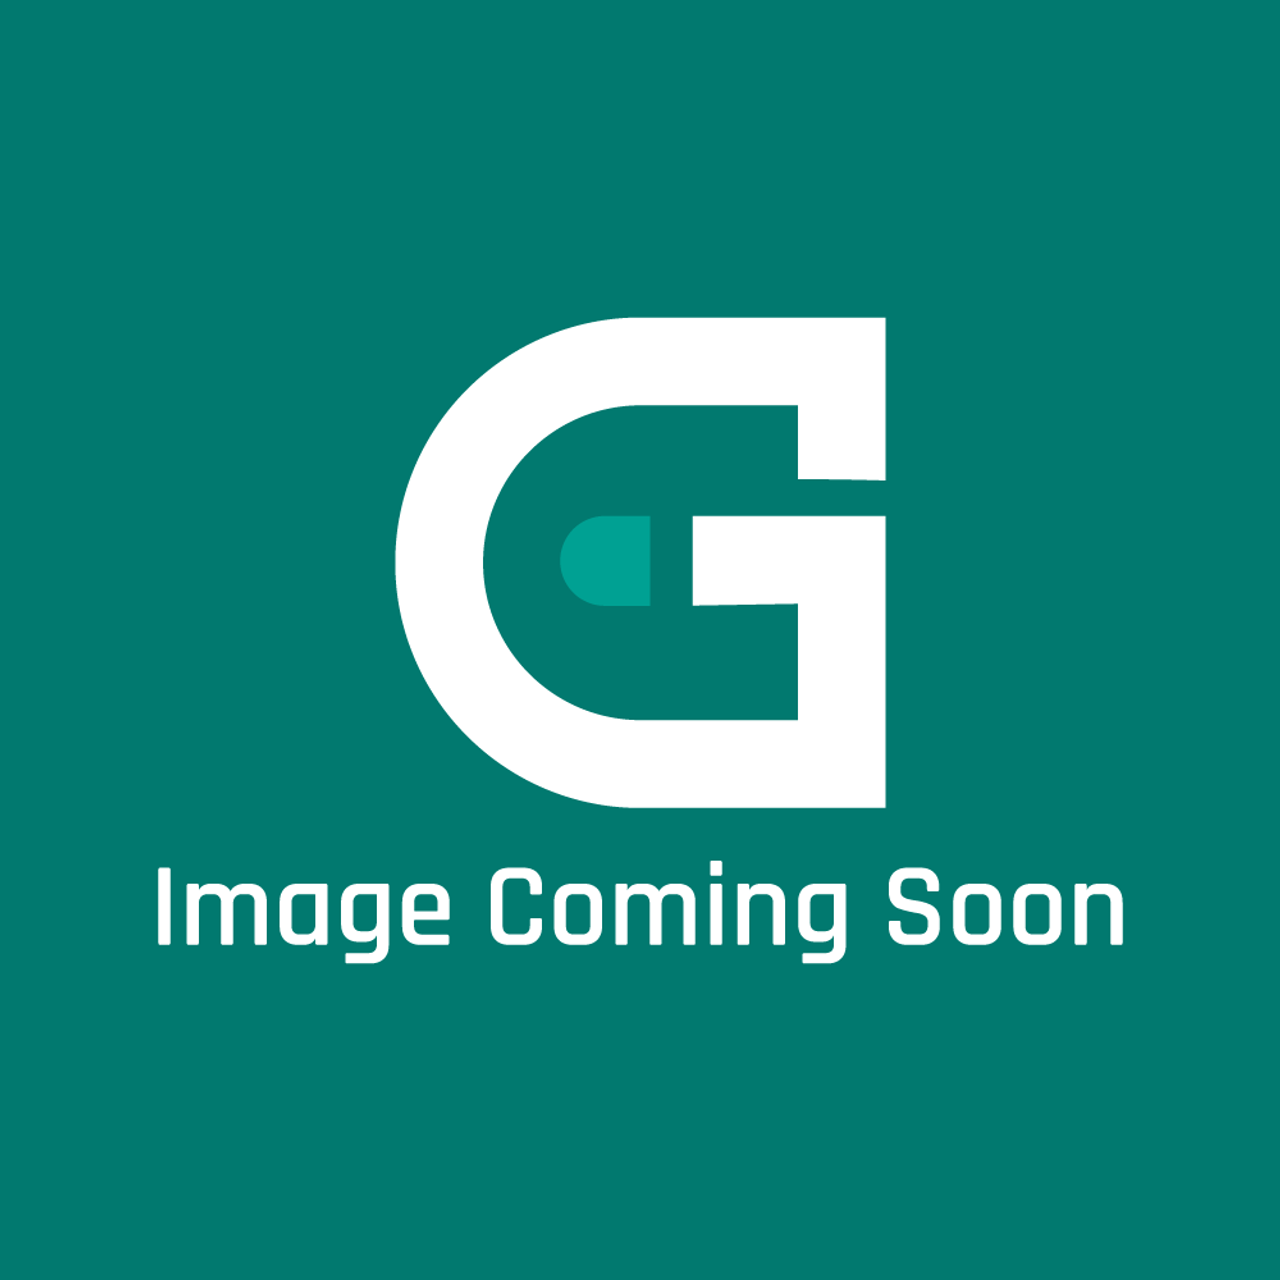 Electrolux M0883 - Gas Tap, S22 M9 O 791944 - Image Coming Soon!